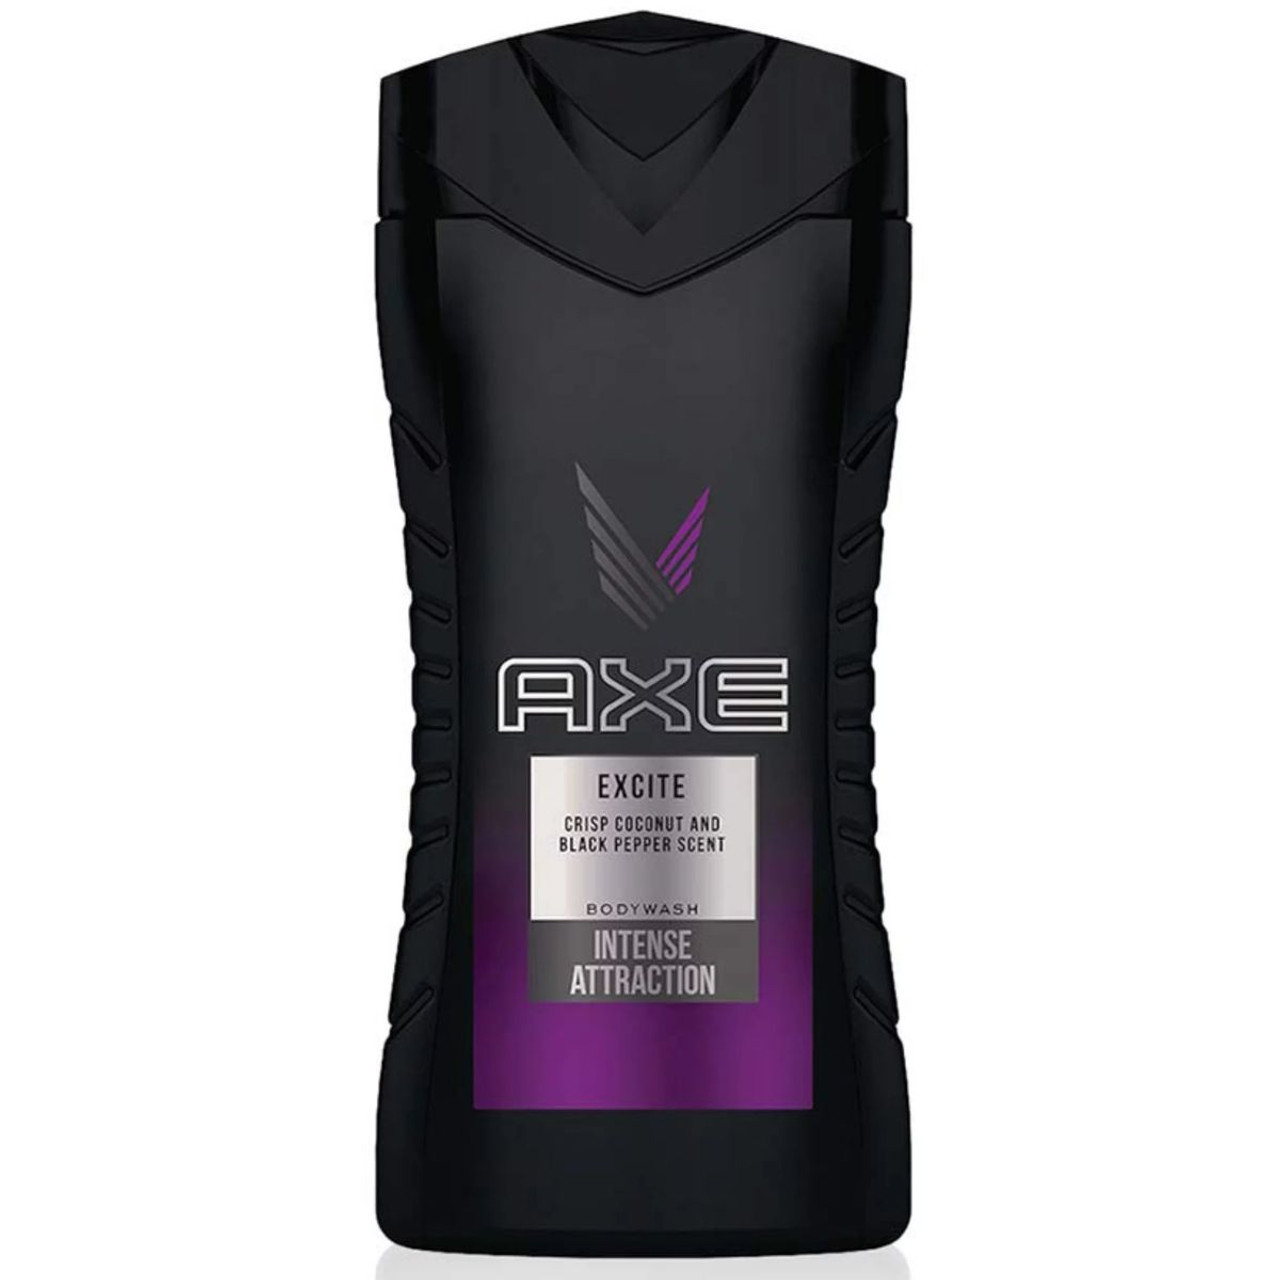 AXE® Body Wash Shower Gel, 8.45 fl. oz. (10-Pack) product image